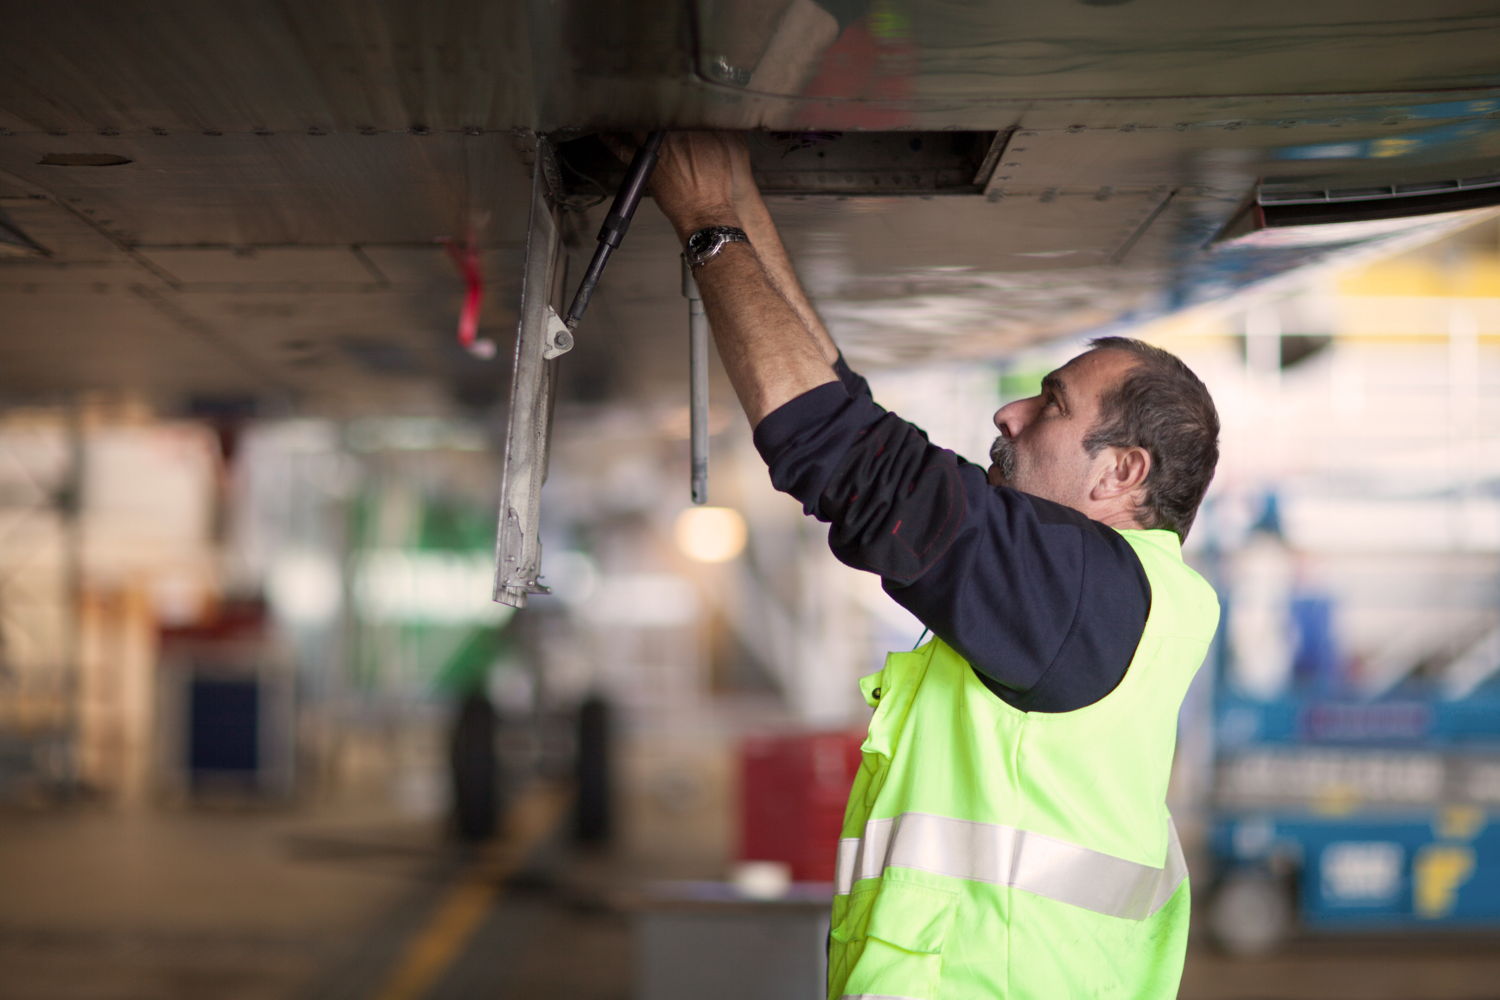 Brussels Airlines is looking for Technicians
